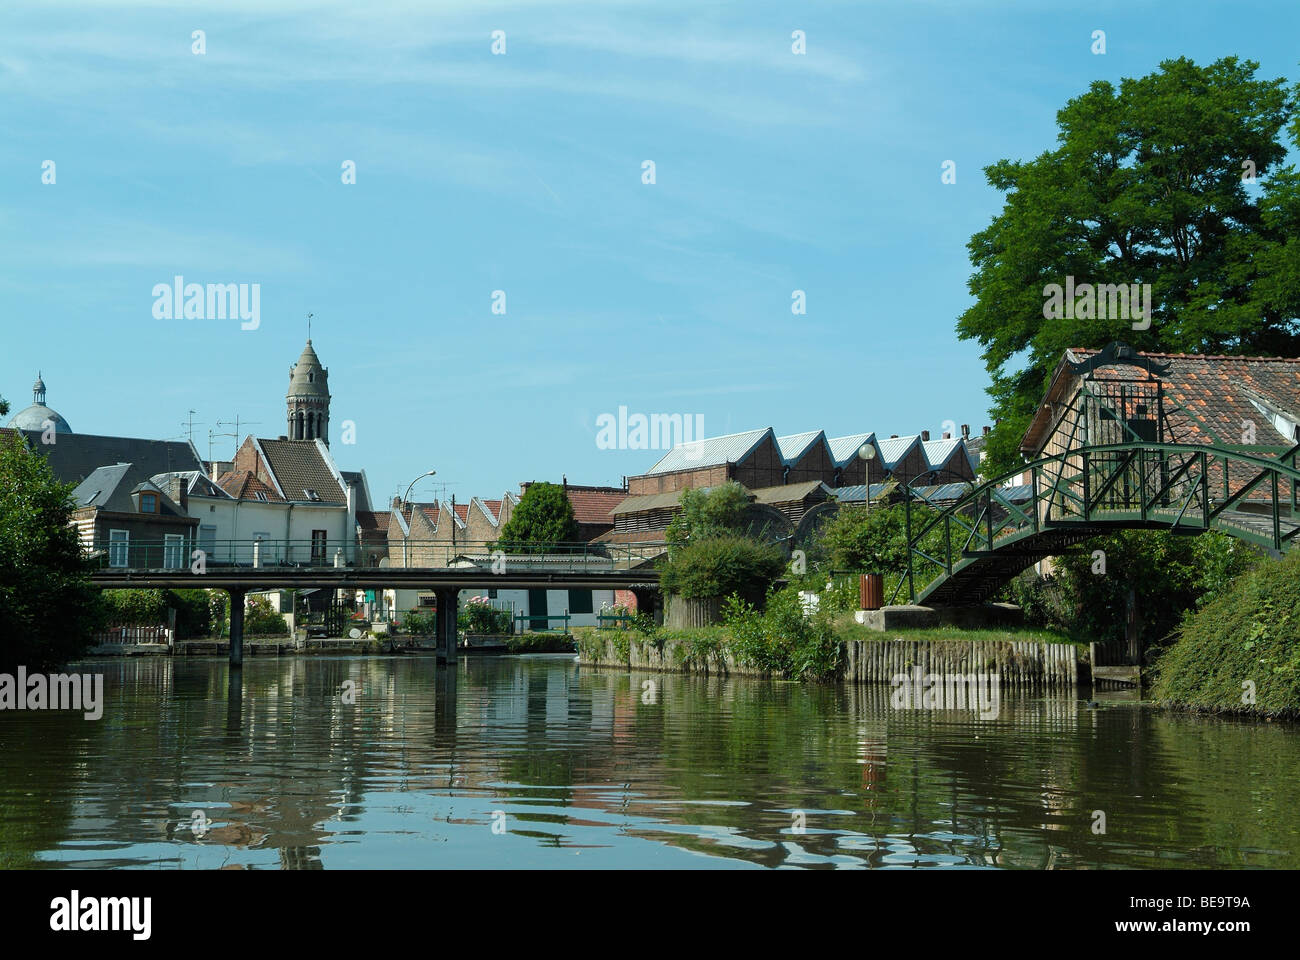 Les hortillonnages in Amiens, Picardy, North of France, Europe Stock Photo